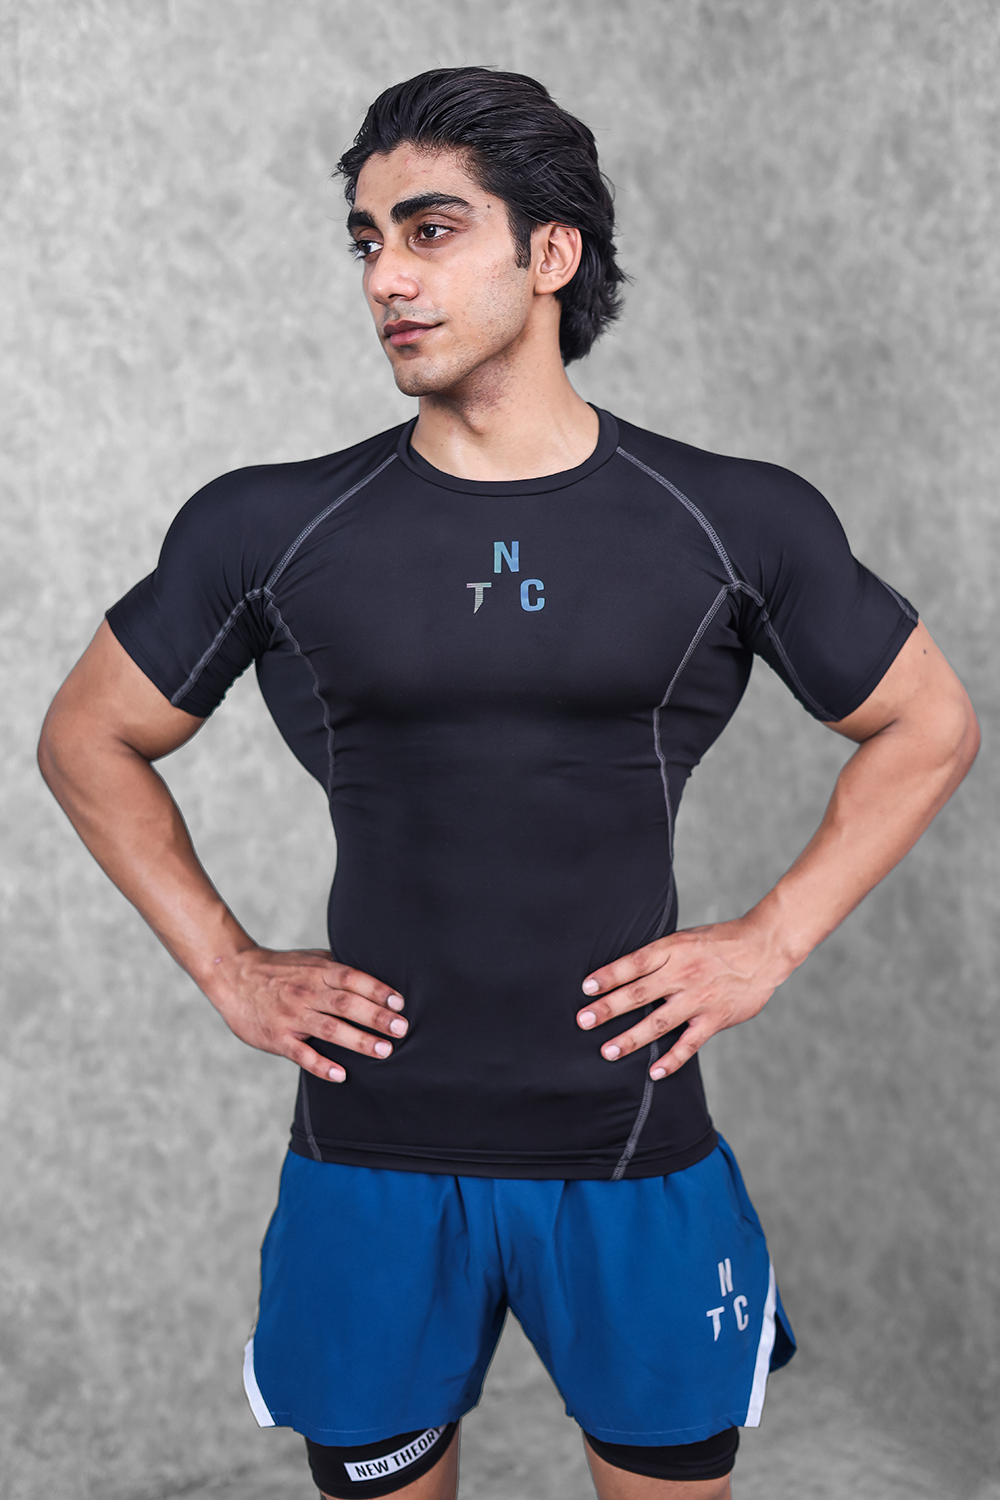 Buy Gym Tshirt Online for Men at Best Price in India: New Theory